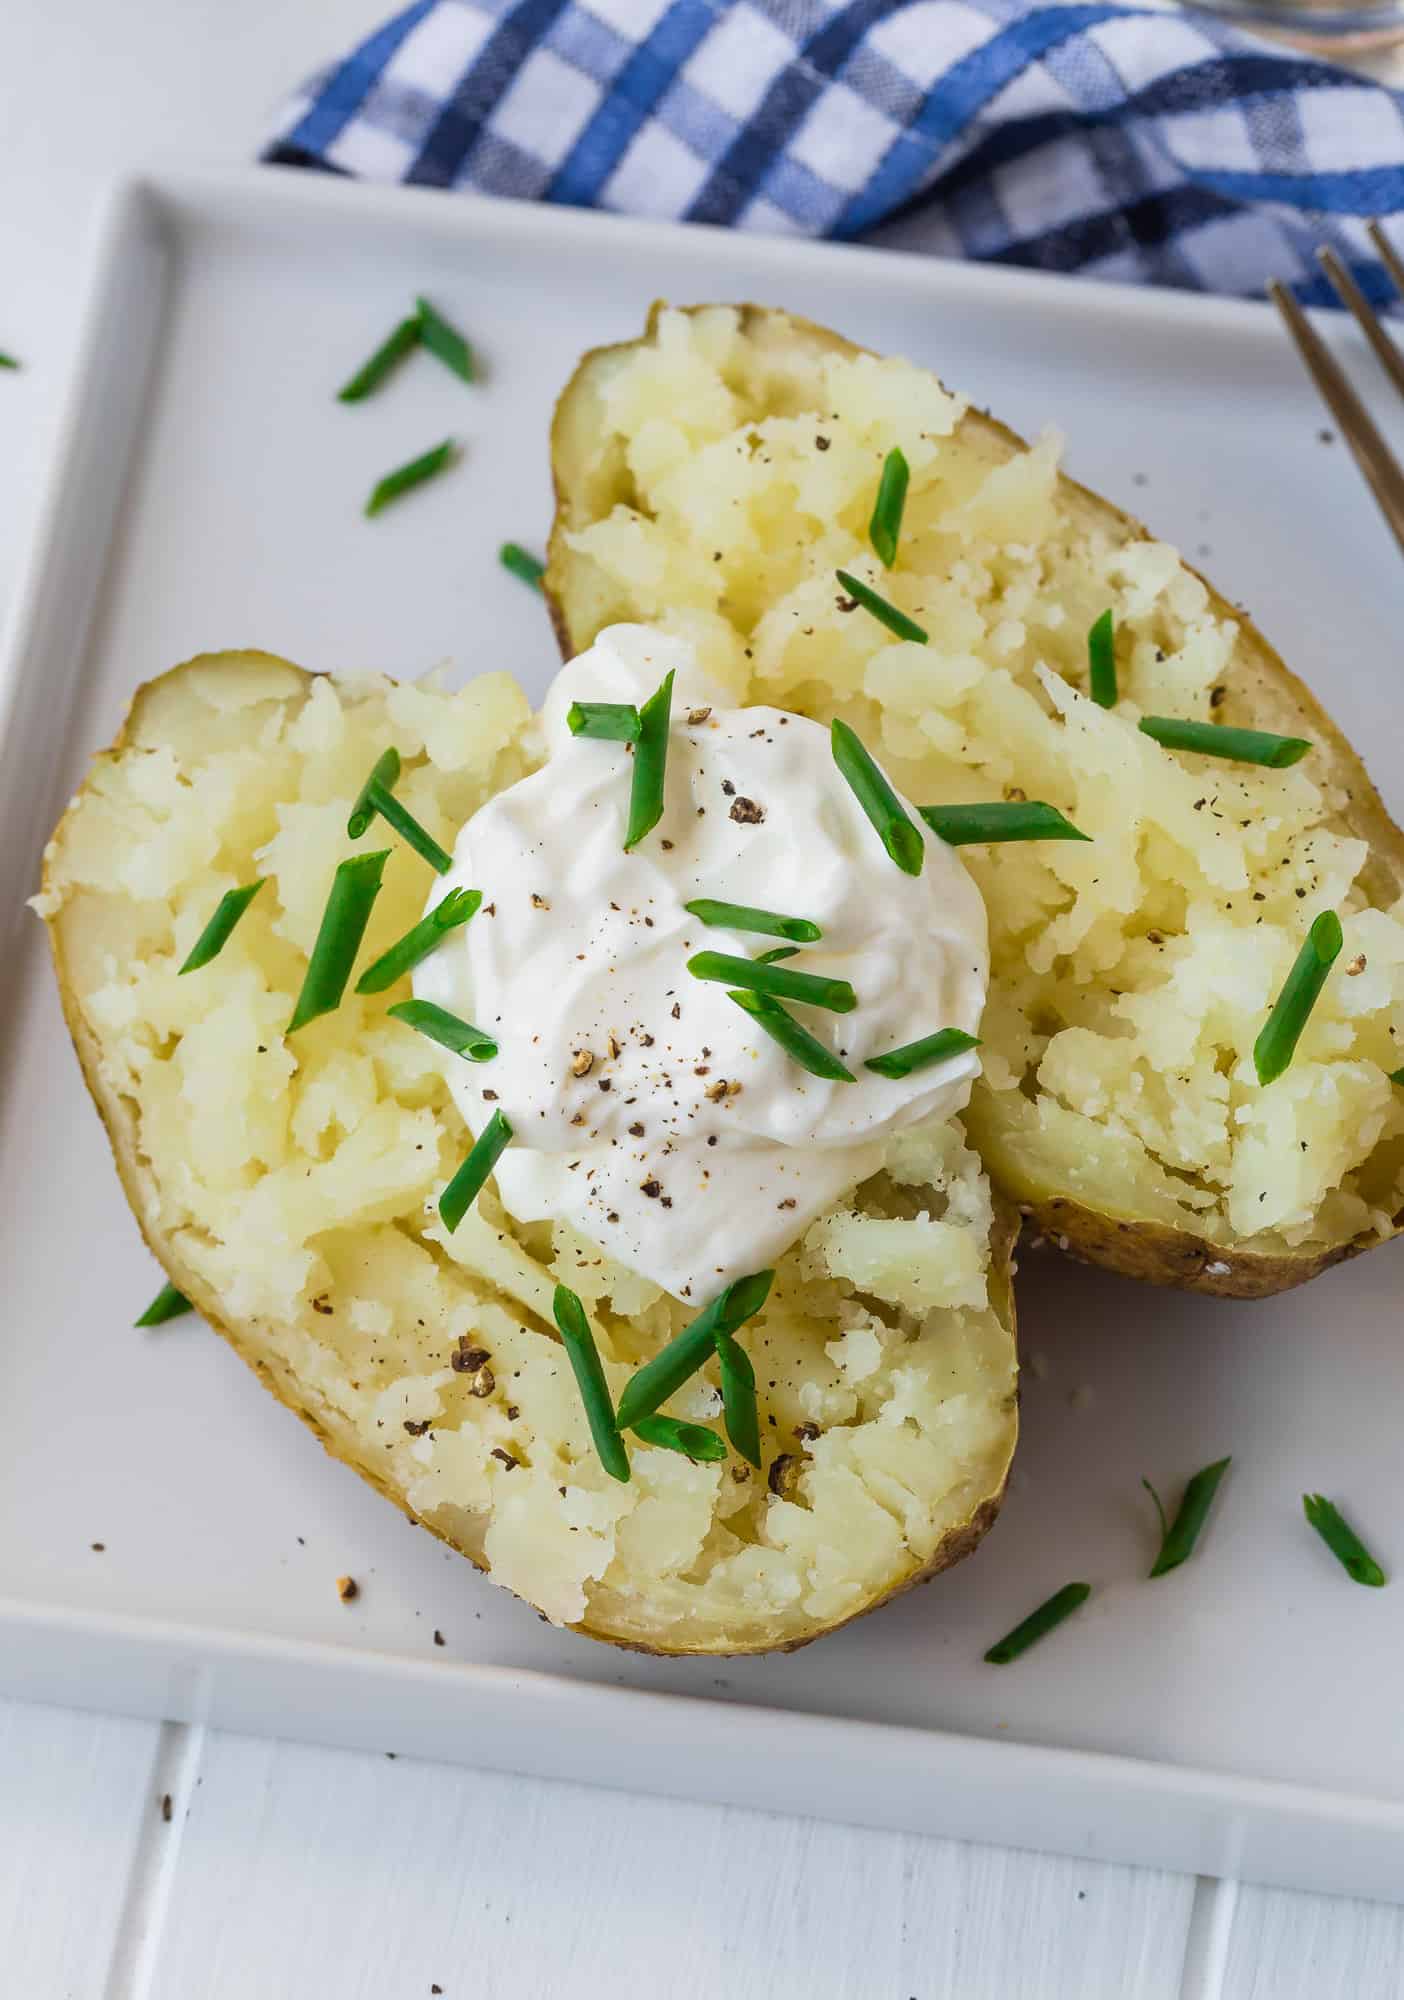 Baked potato cut open and topped with sour cream and chives.